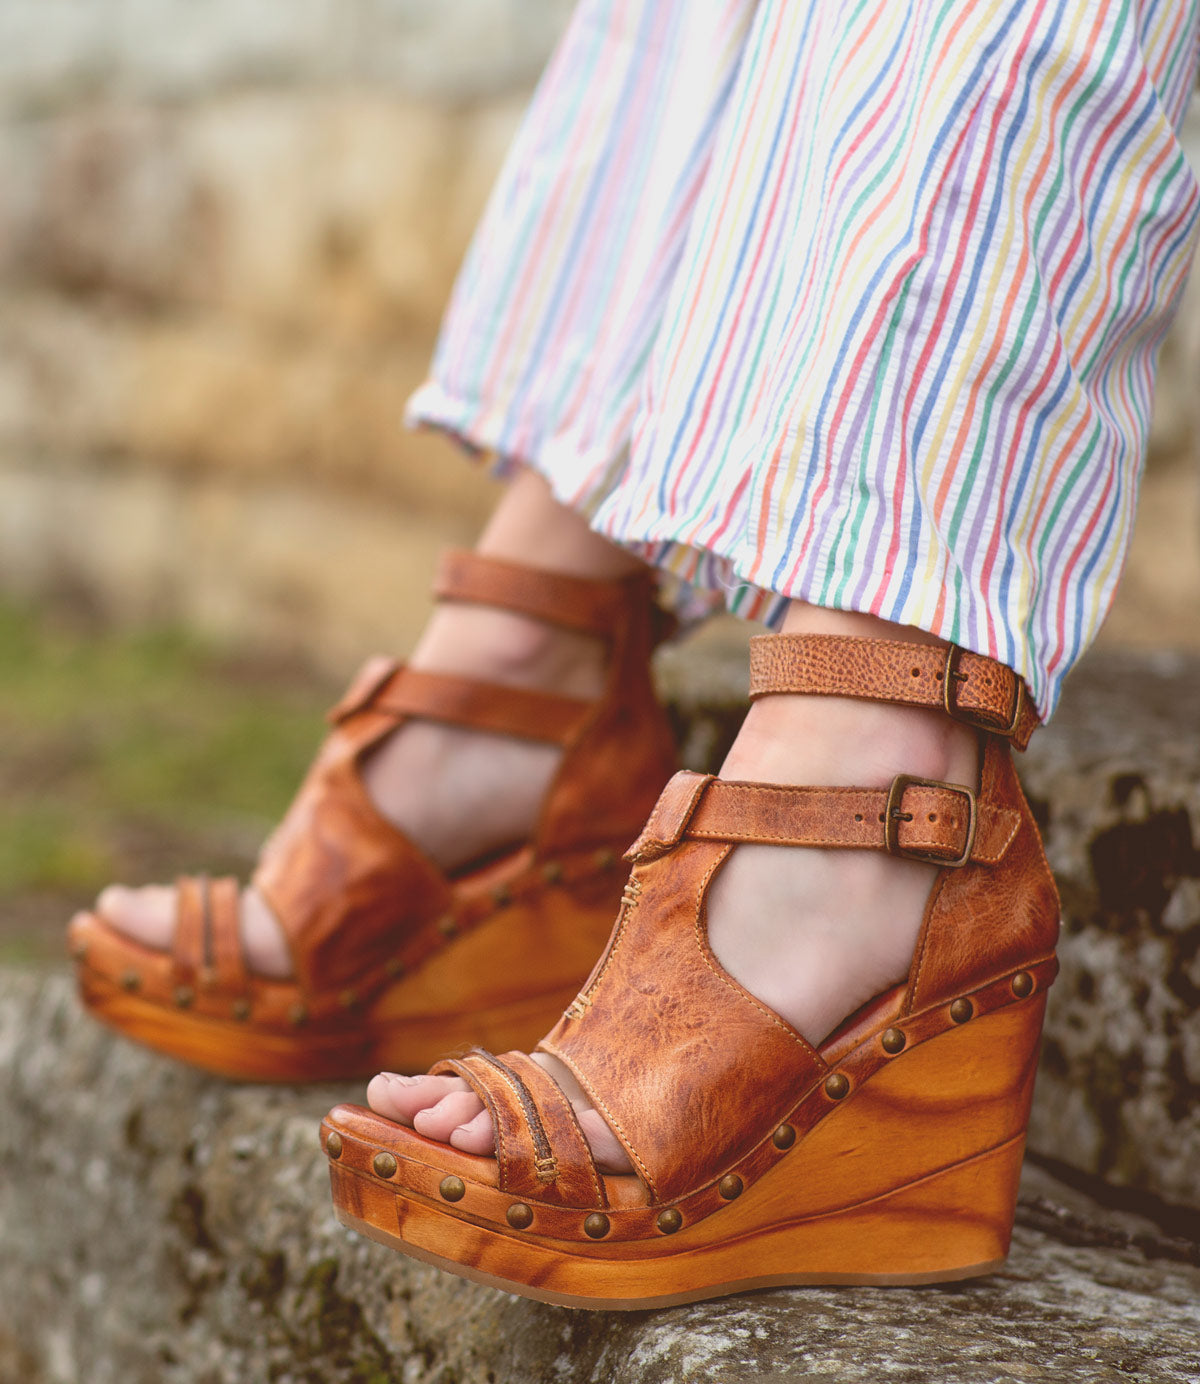 A woman wearing a pair of Bed Stu Princess brown wedge sandals.